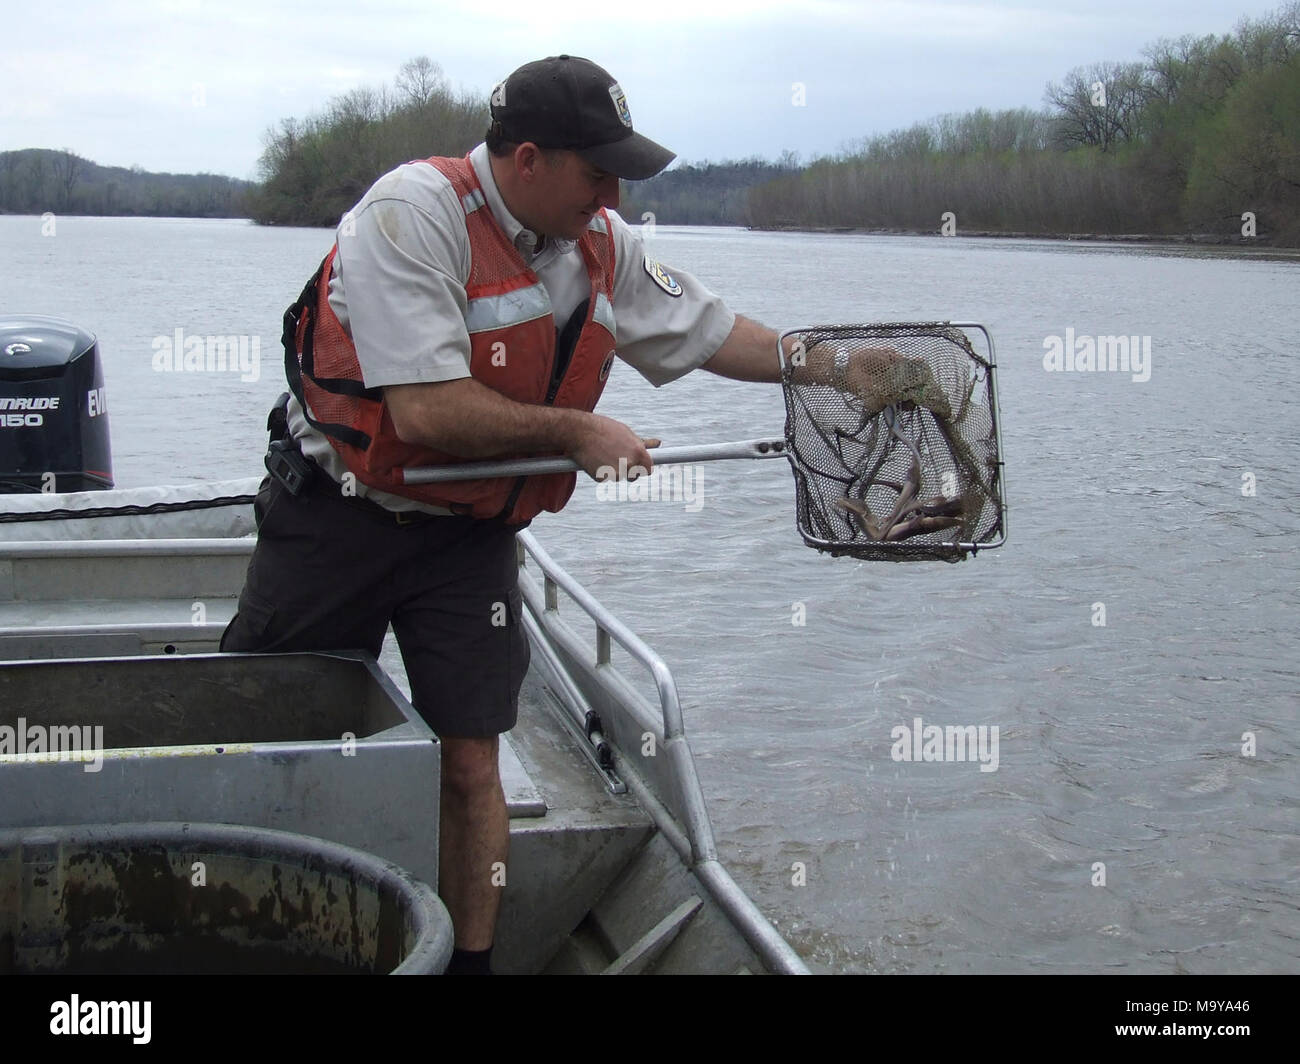 Into the wild. U.S. Fish and Wildlife Service biologist Wyatt Doyle releases a hatchery-bred endangered pallid sturgeon into the lower Missouri River. Scientists hope captive breeding will help repopulate the species (USFWS) Stock Photo